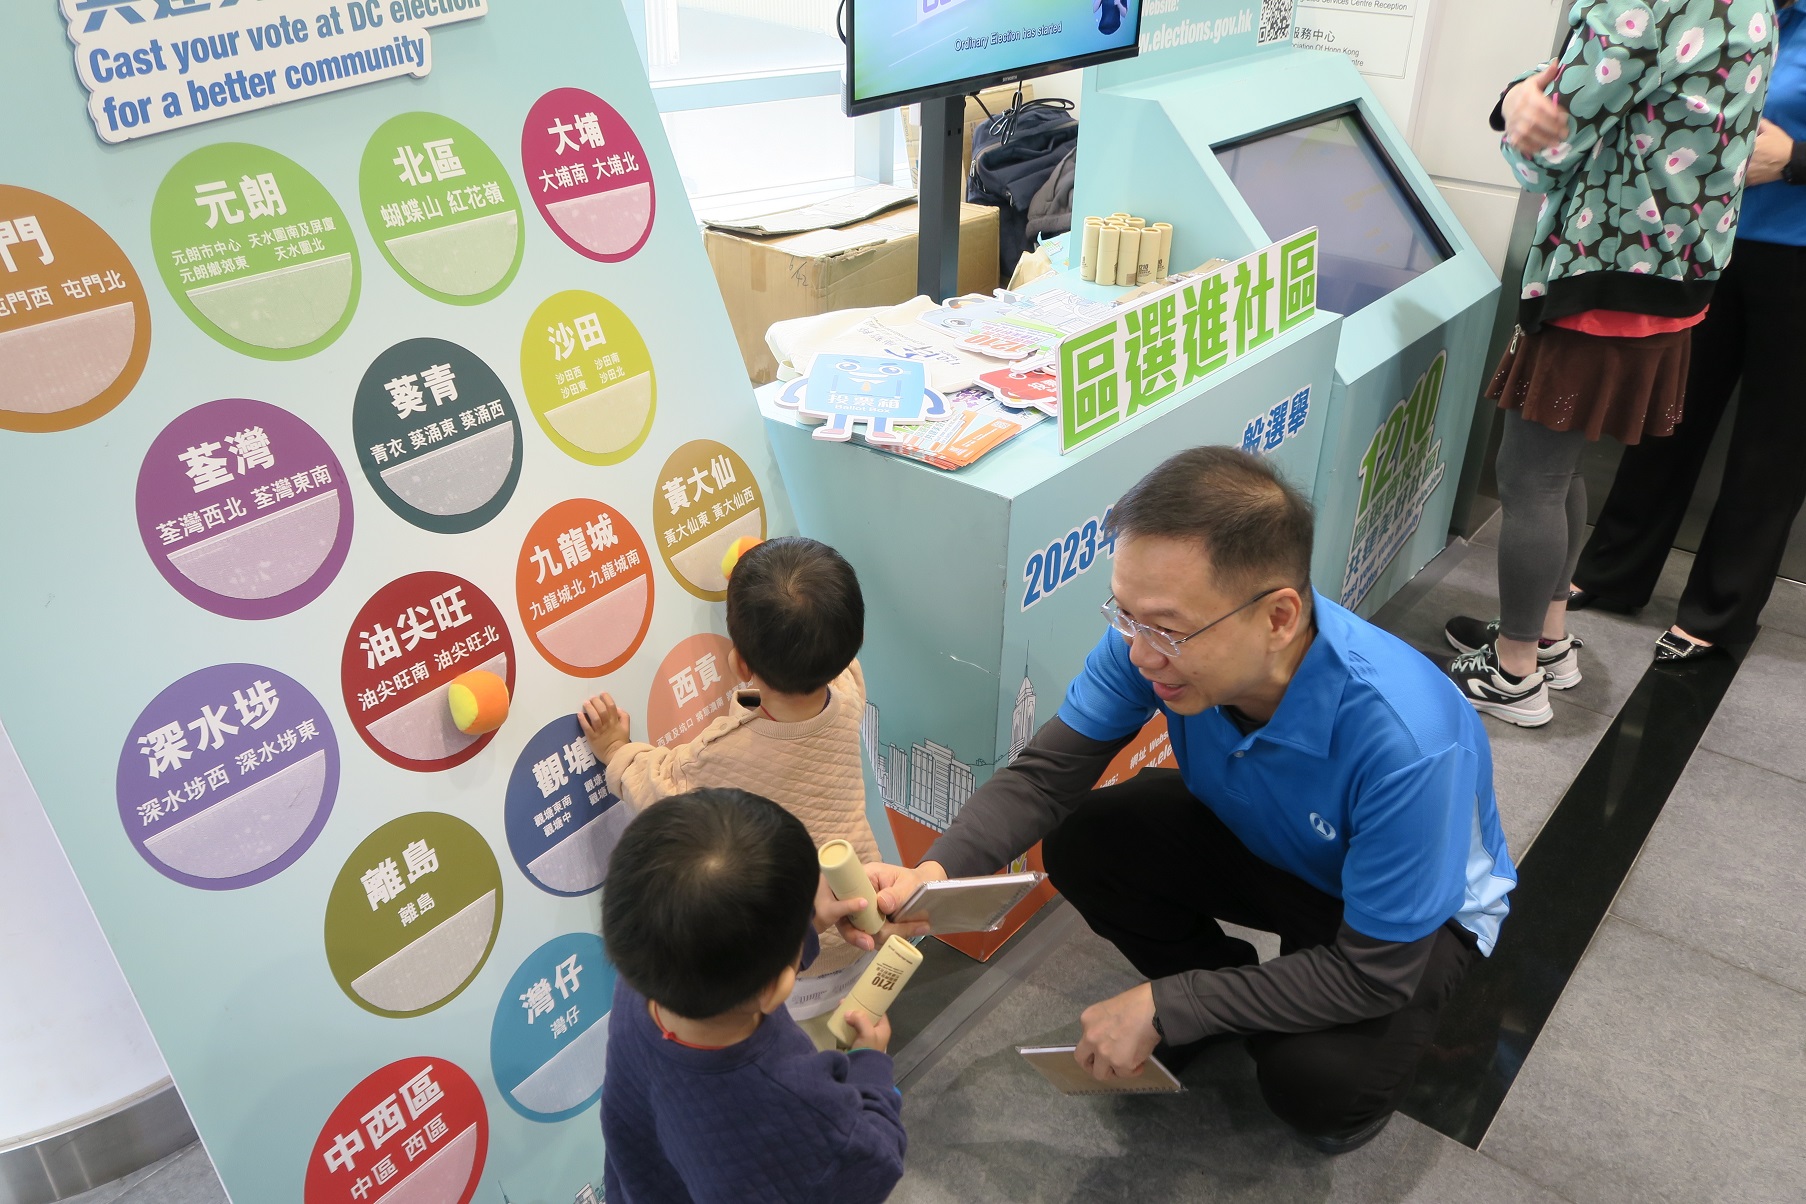 Photo 4: The Government Chemist, Dr LEE Wai-on playing interactive games with the public.